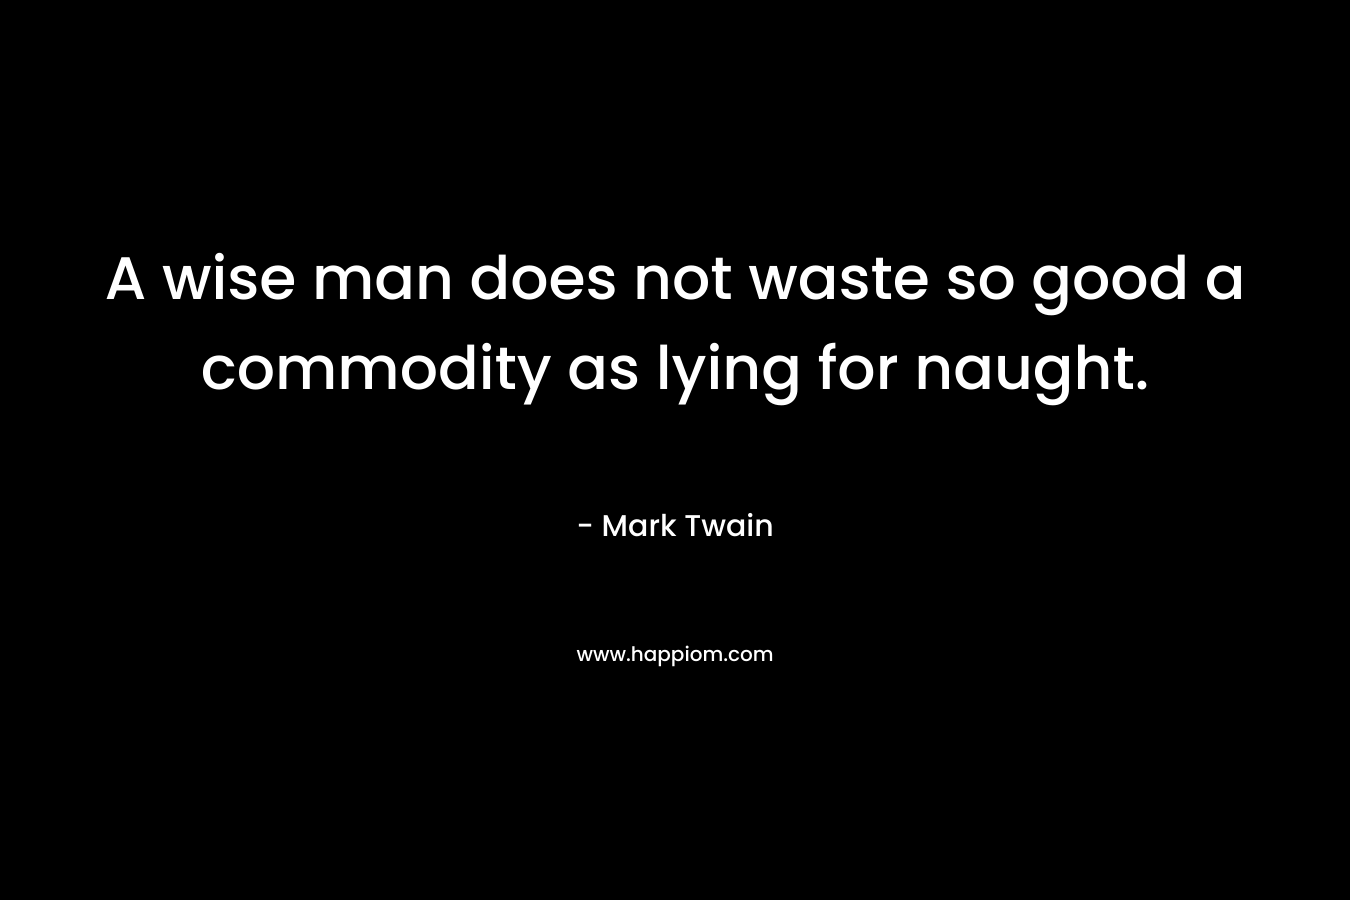 A wise man does not waste so good a commodity as lying for naught. – Mark Twain